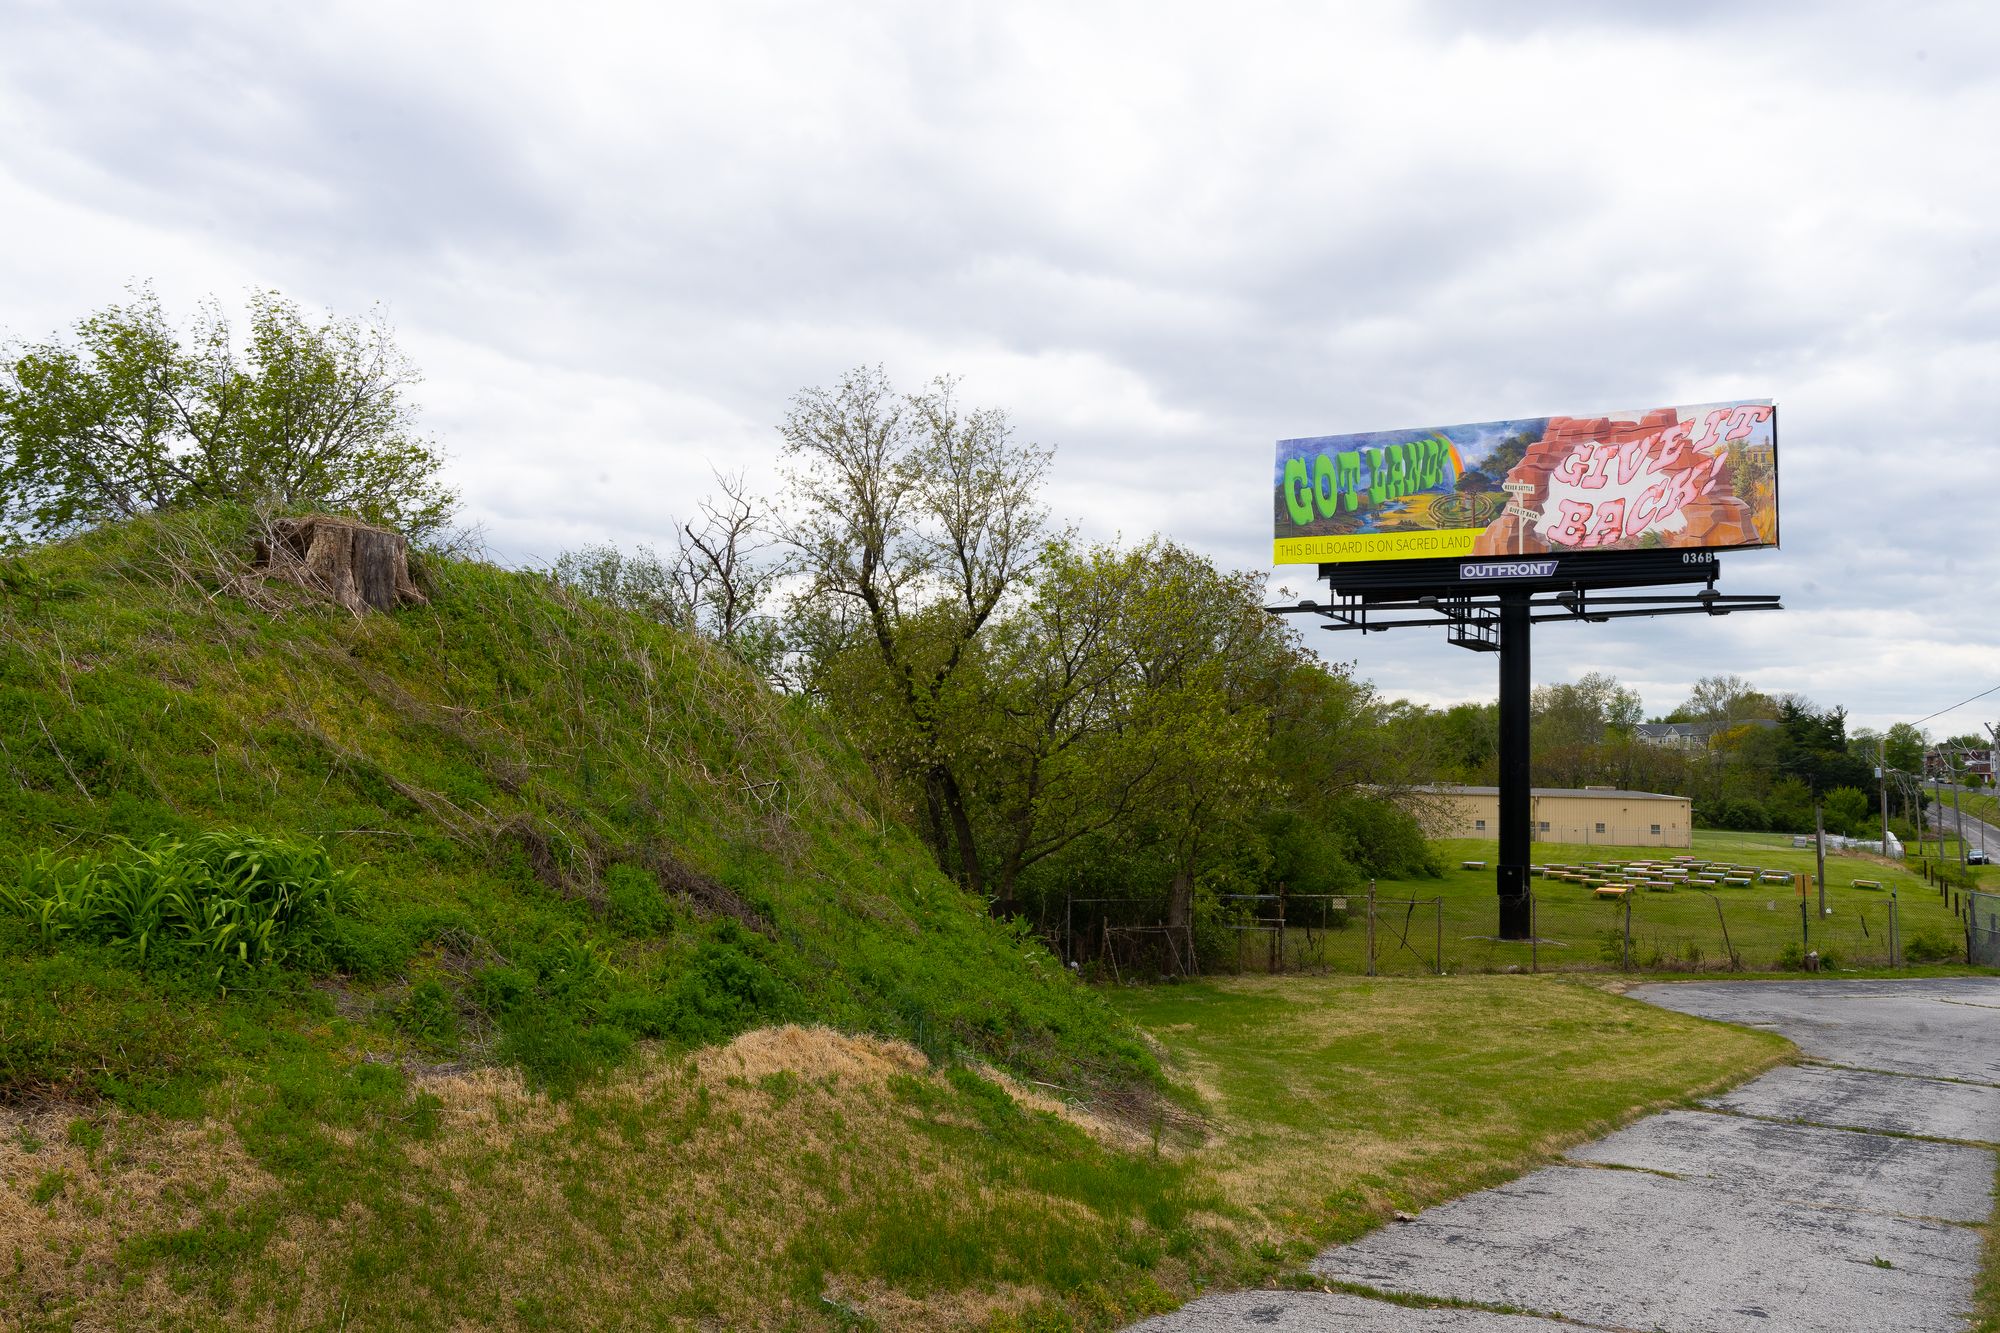 A billboard on a grassy hill with cartoonish lettering that reads: "This billboard is on sacred land."